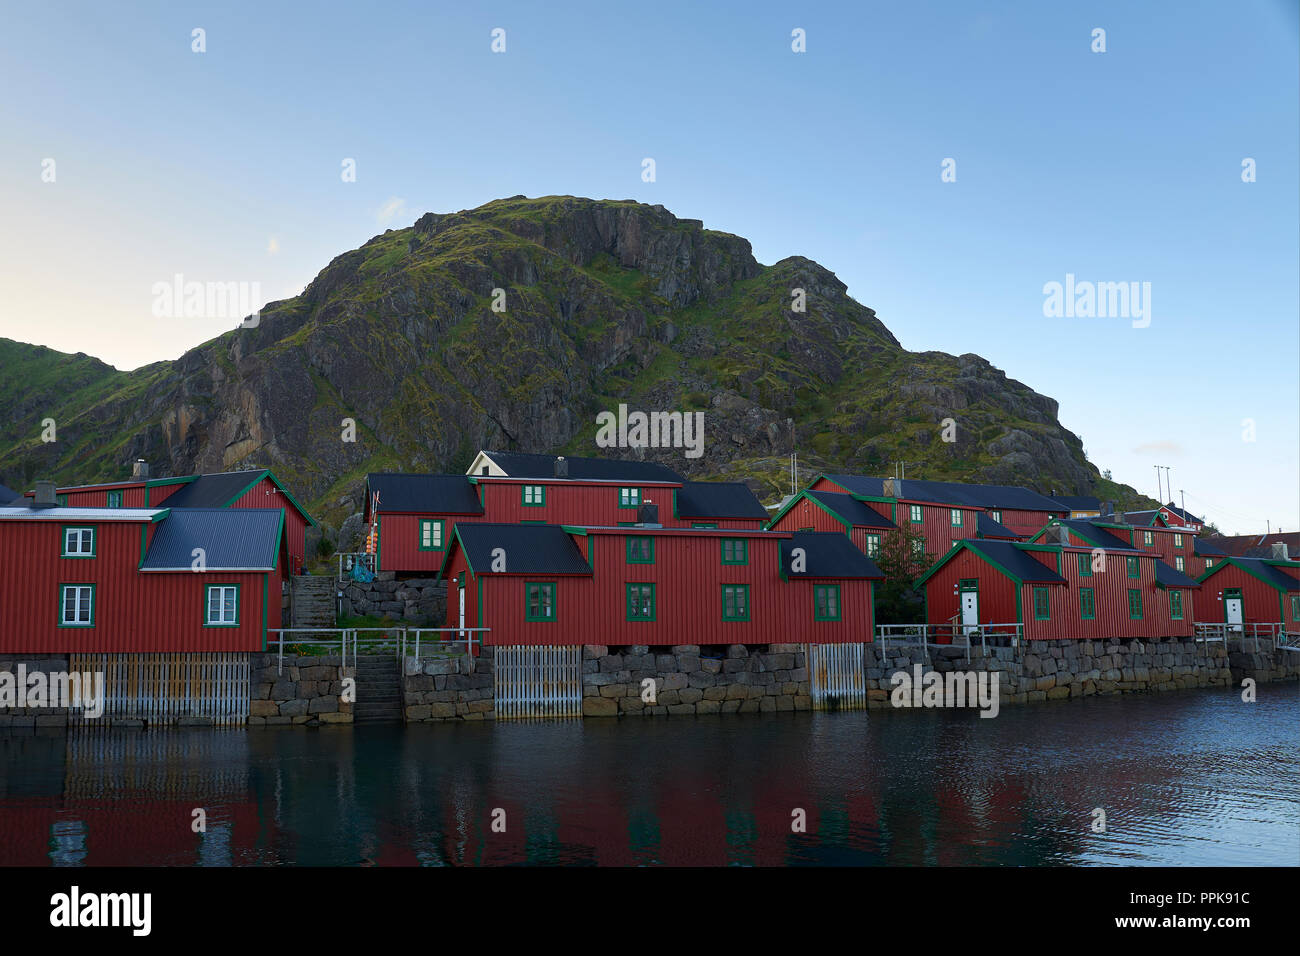 Restored Fishermen's Shacks (Rorbuer or Rorbu), Painted In The Traditional Falun Red (Falu Red), In The Fishing Village Of Stamsund, Lofoten Islands. Stock Photo